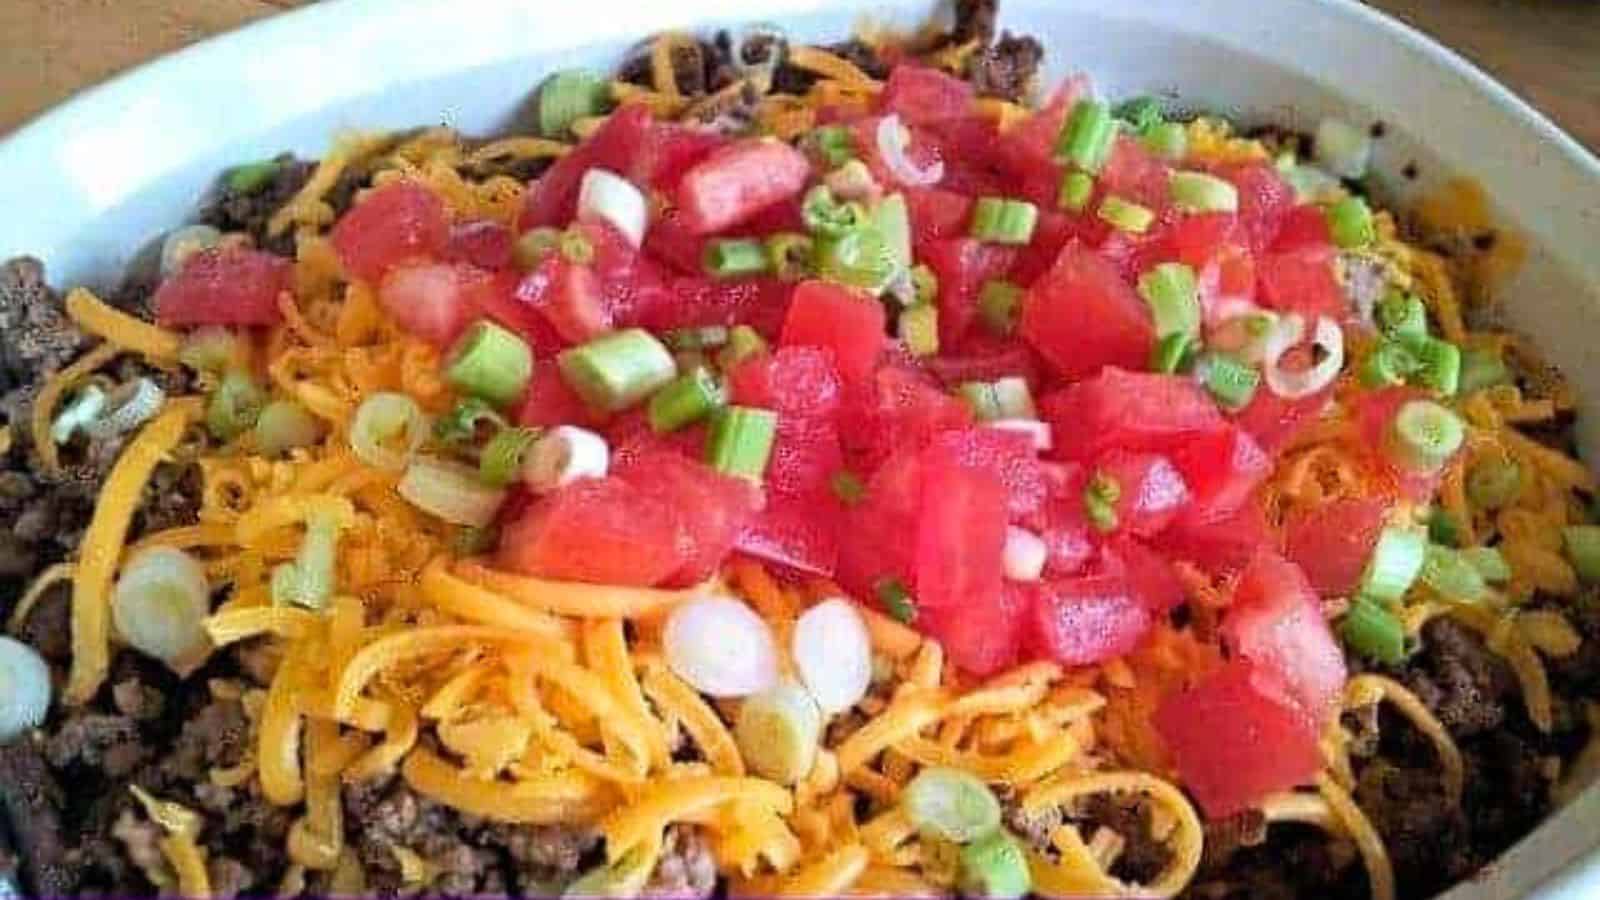 Image shows a closeup of a casserole dish filled with non-traditional seven layer dip.